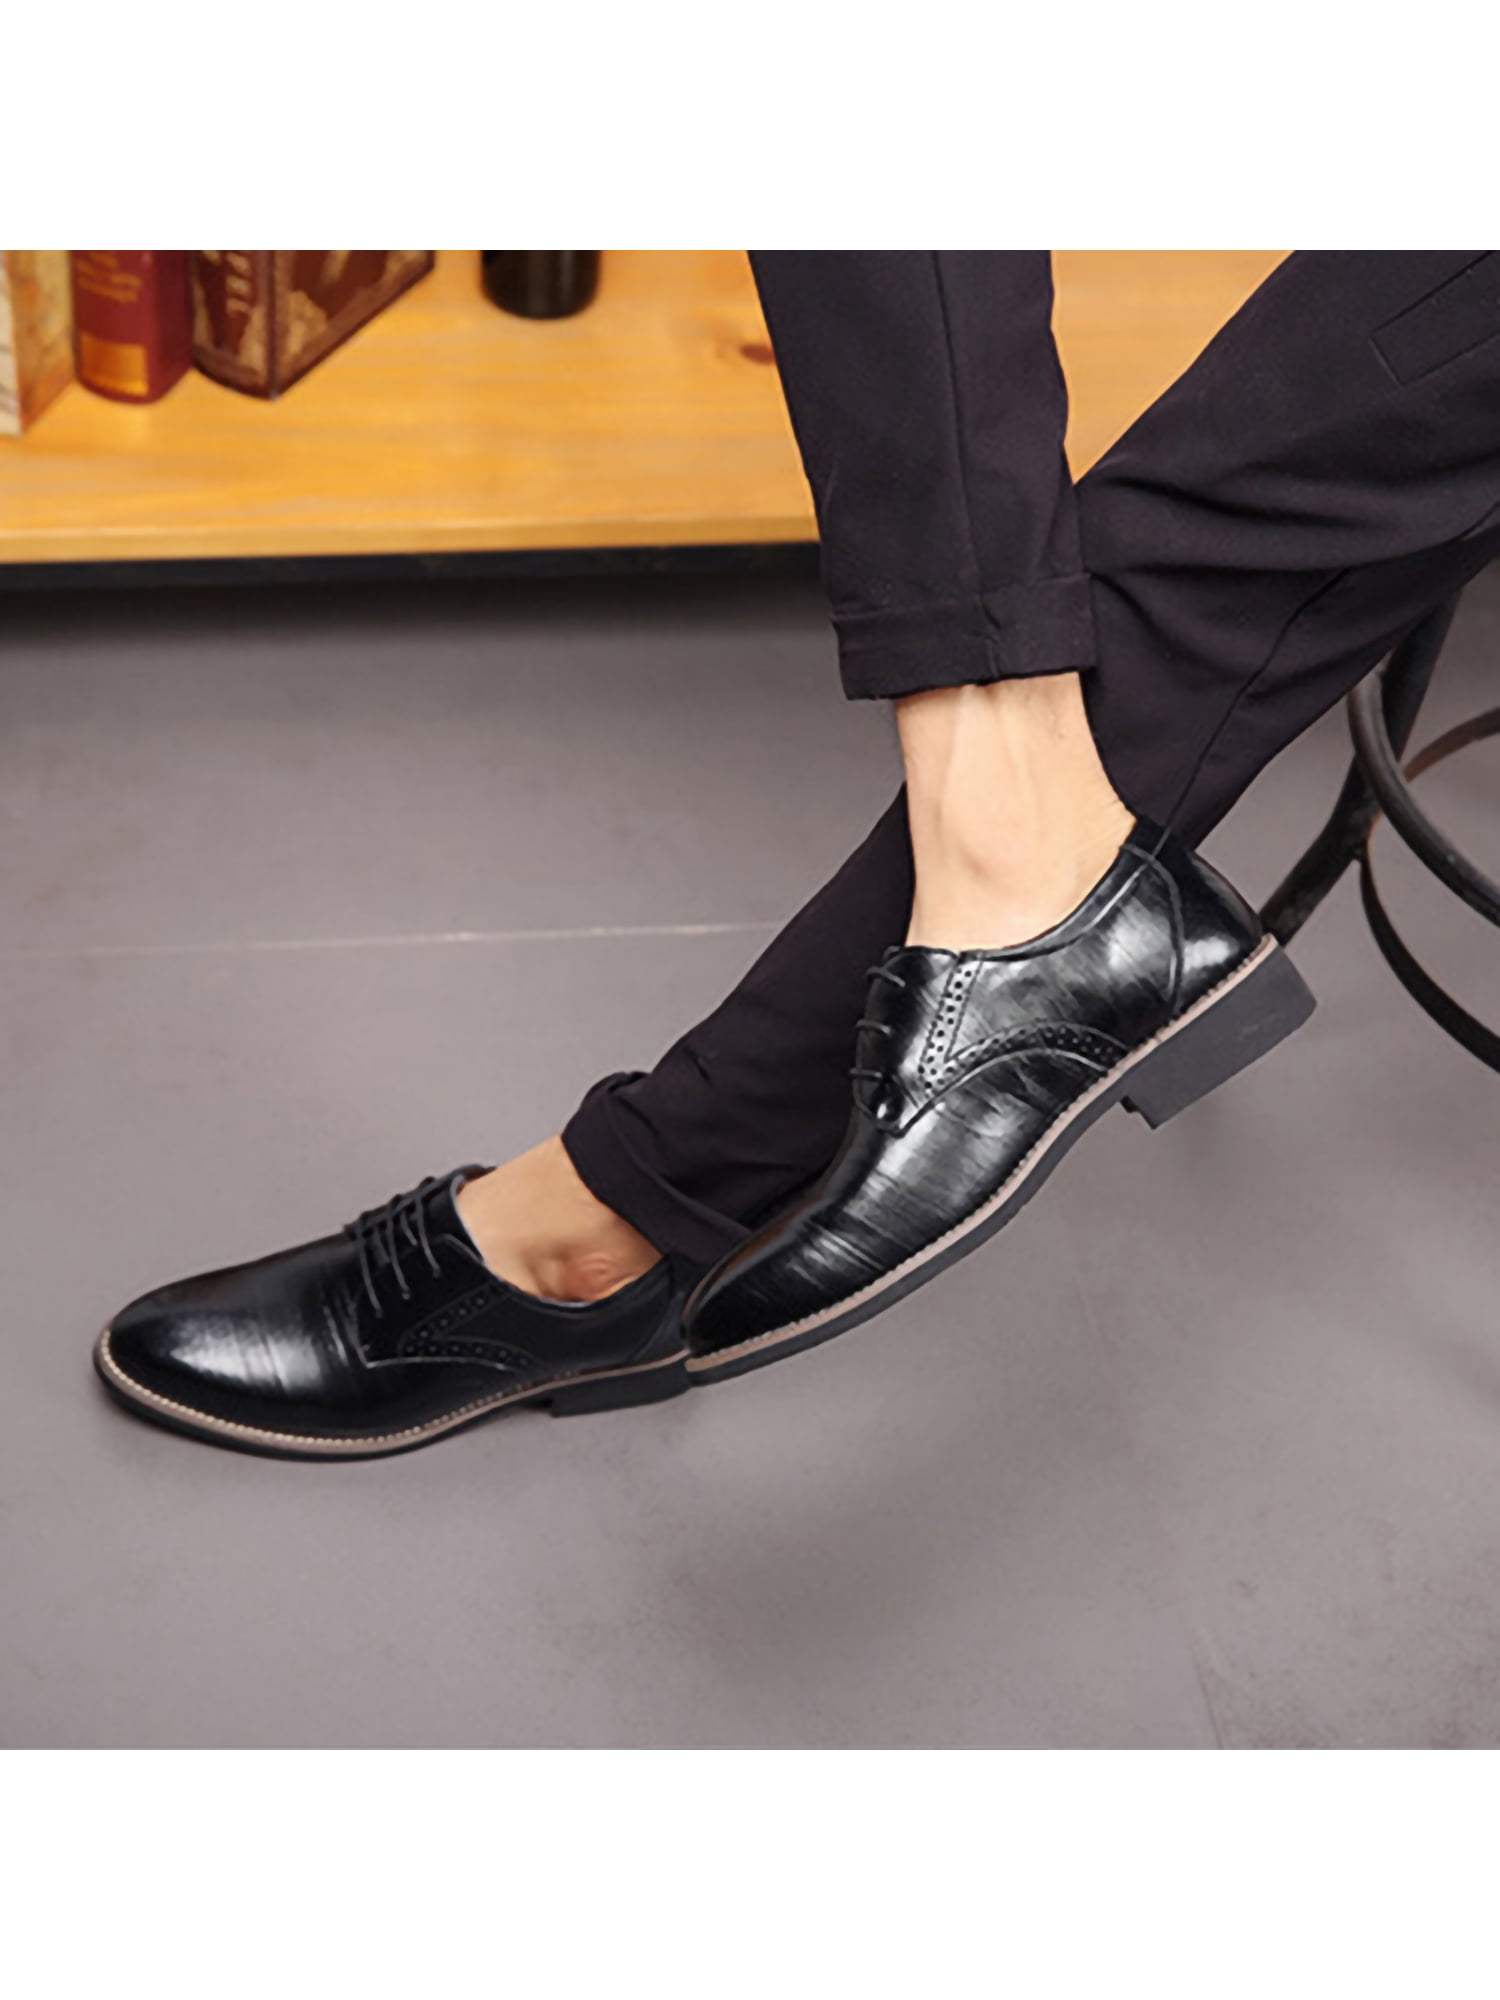 Men Mens PU Leather Business Oxfords Lace Up Square Texture Block Heel Formal Loafers Breathable Shoes